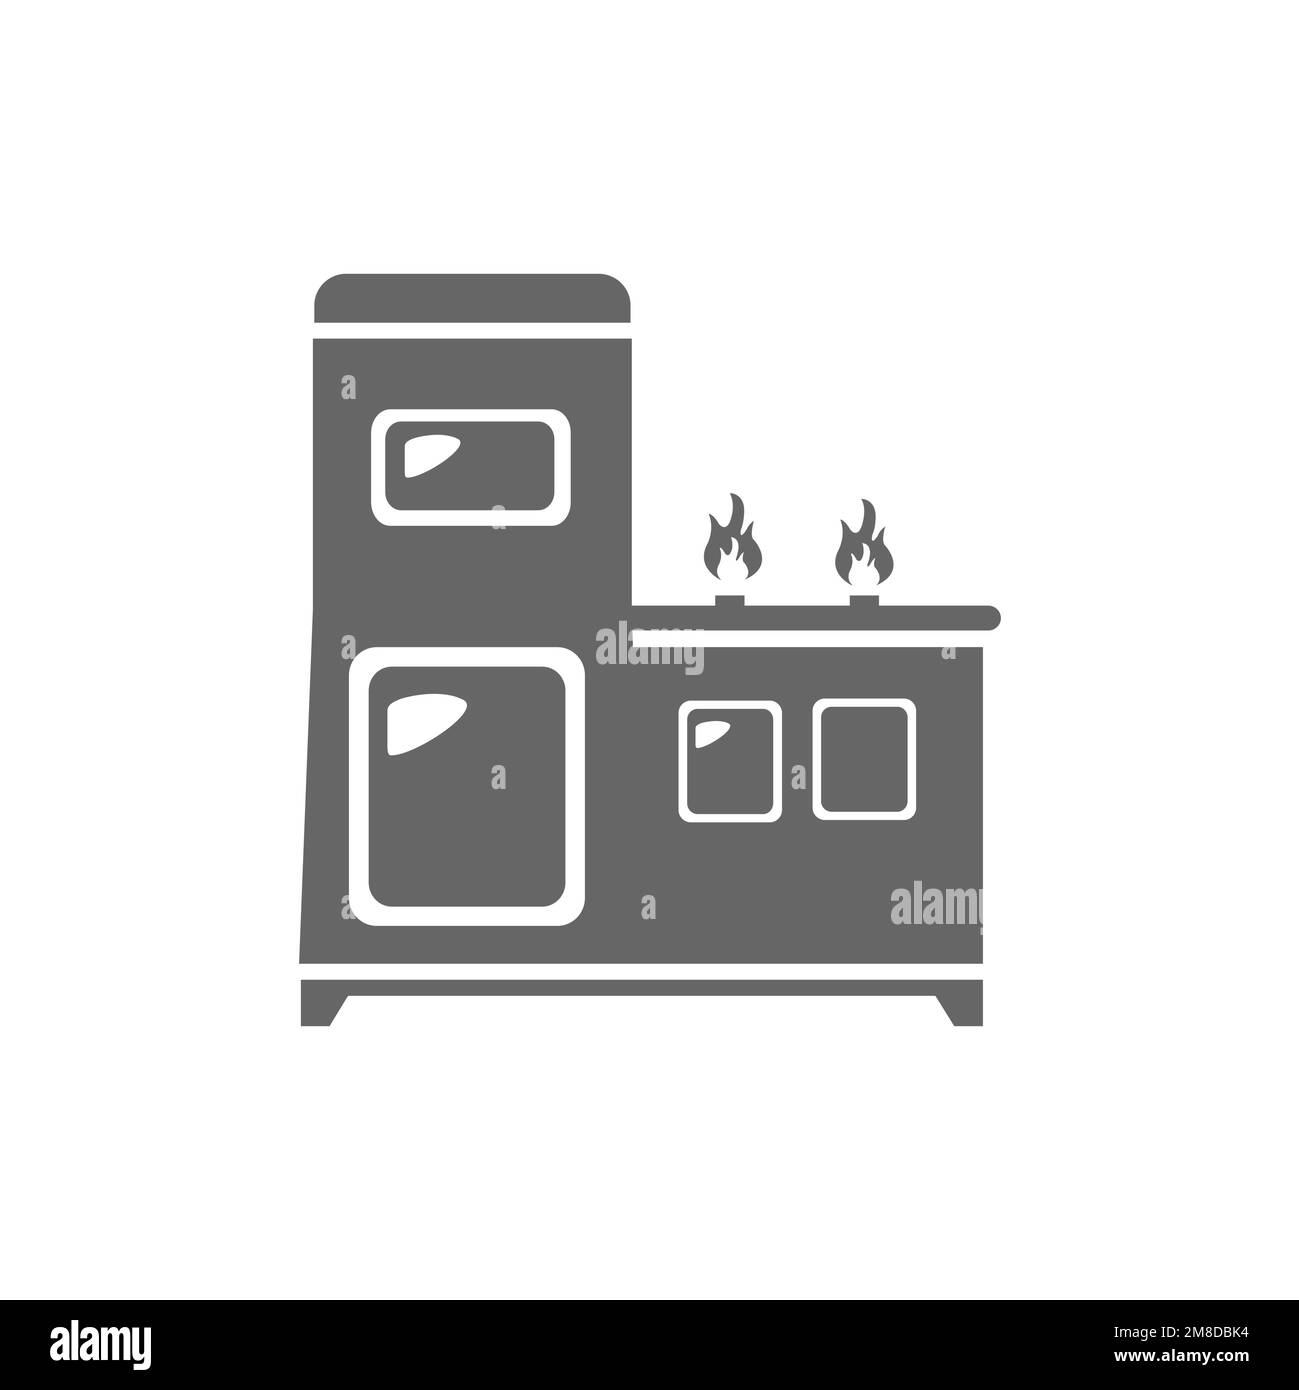 Icons of refrigerators and gas stoves, common graphic resources, vector illustrations. Stock Vector